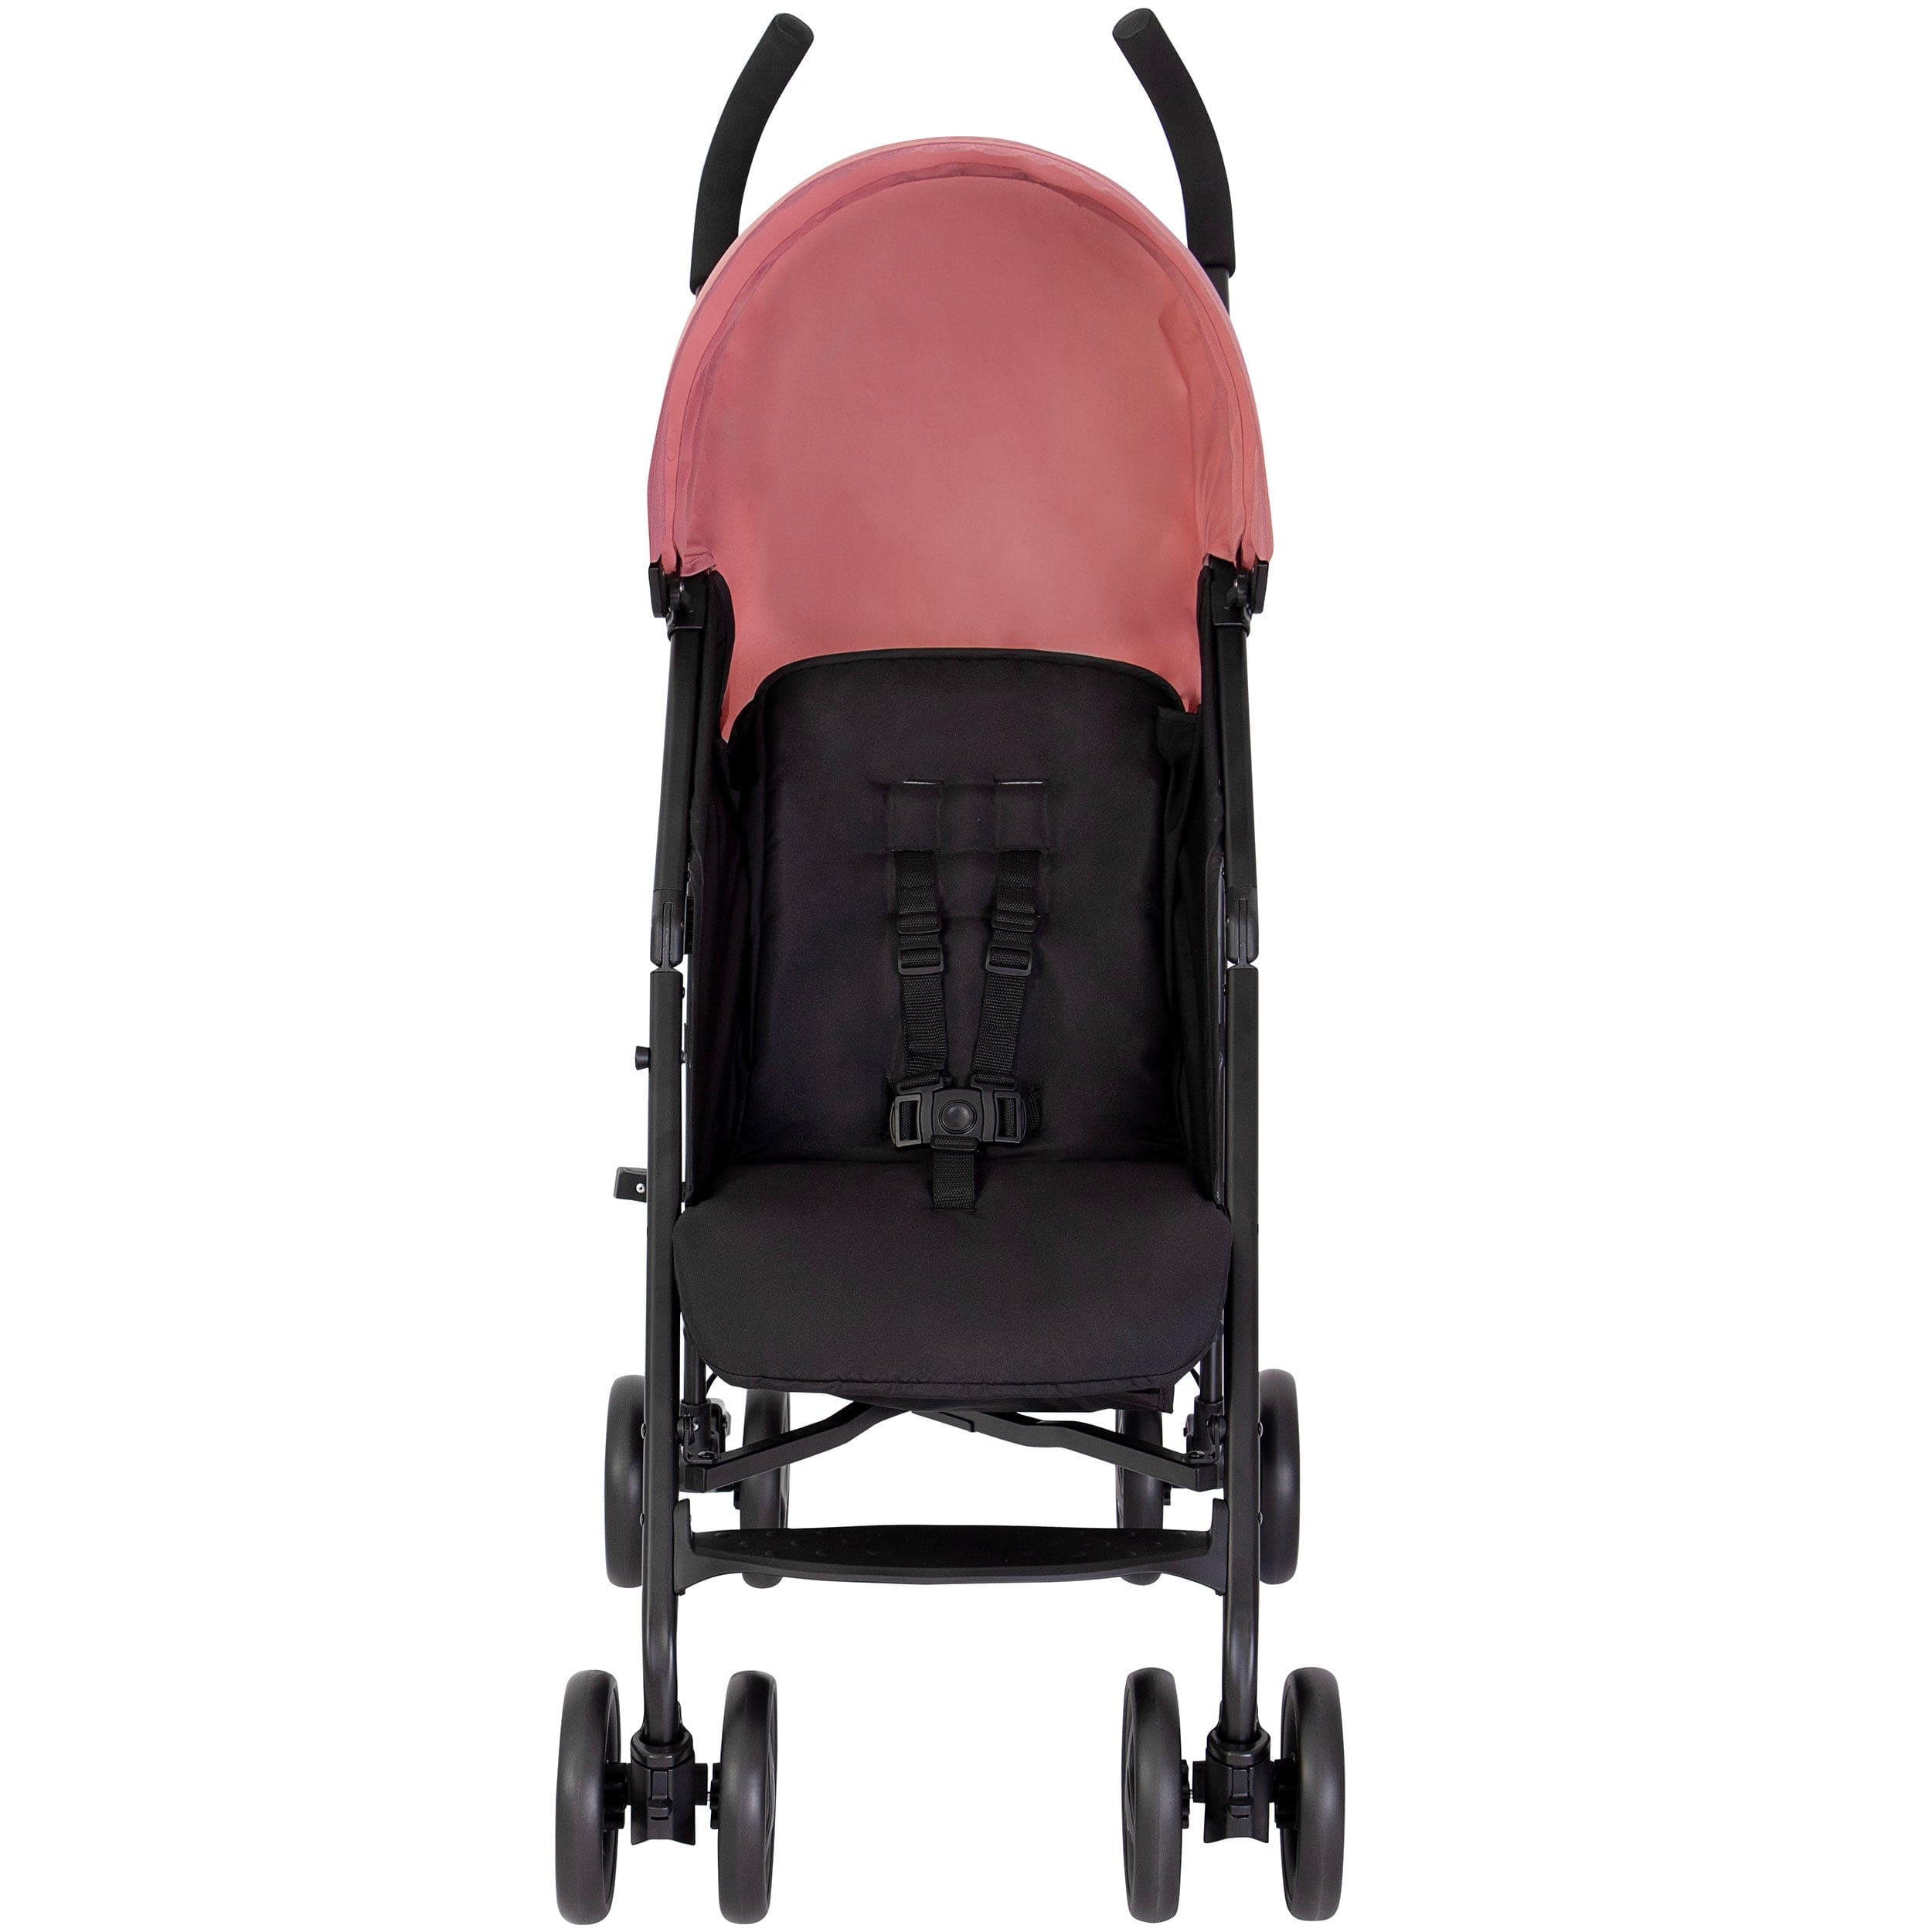 Graco baby pushchairs Graco Ezlite Pushchair in Dusty Rose 6BF899DSTEU